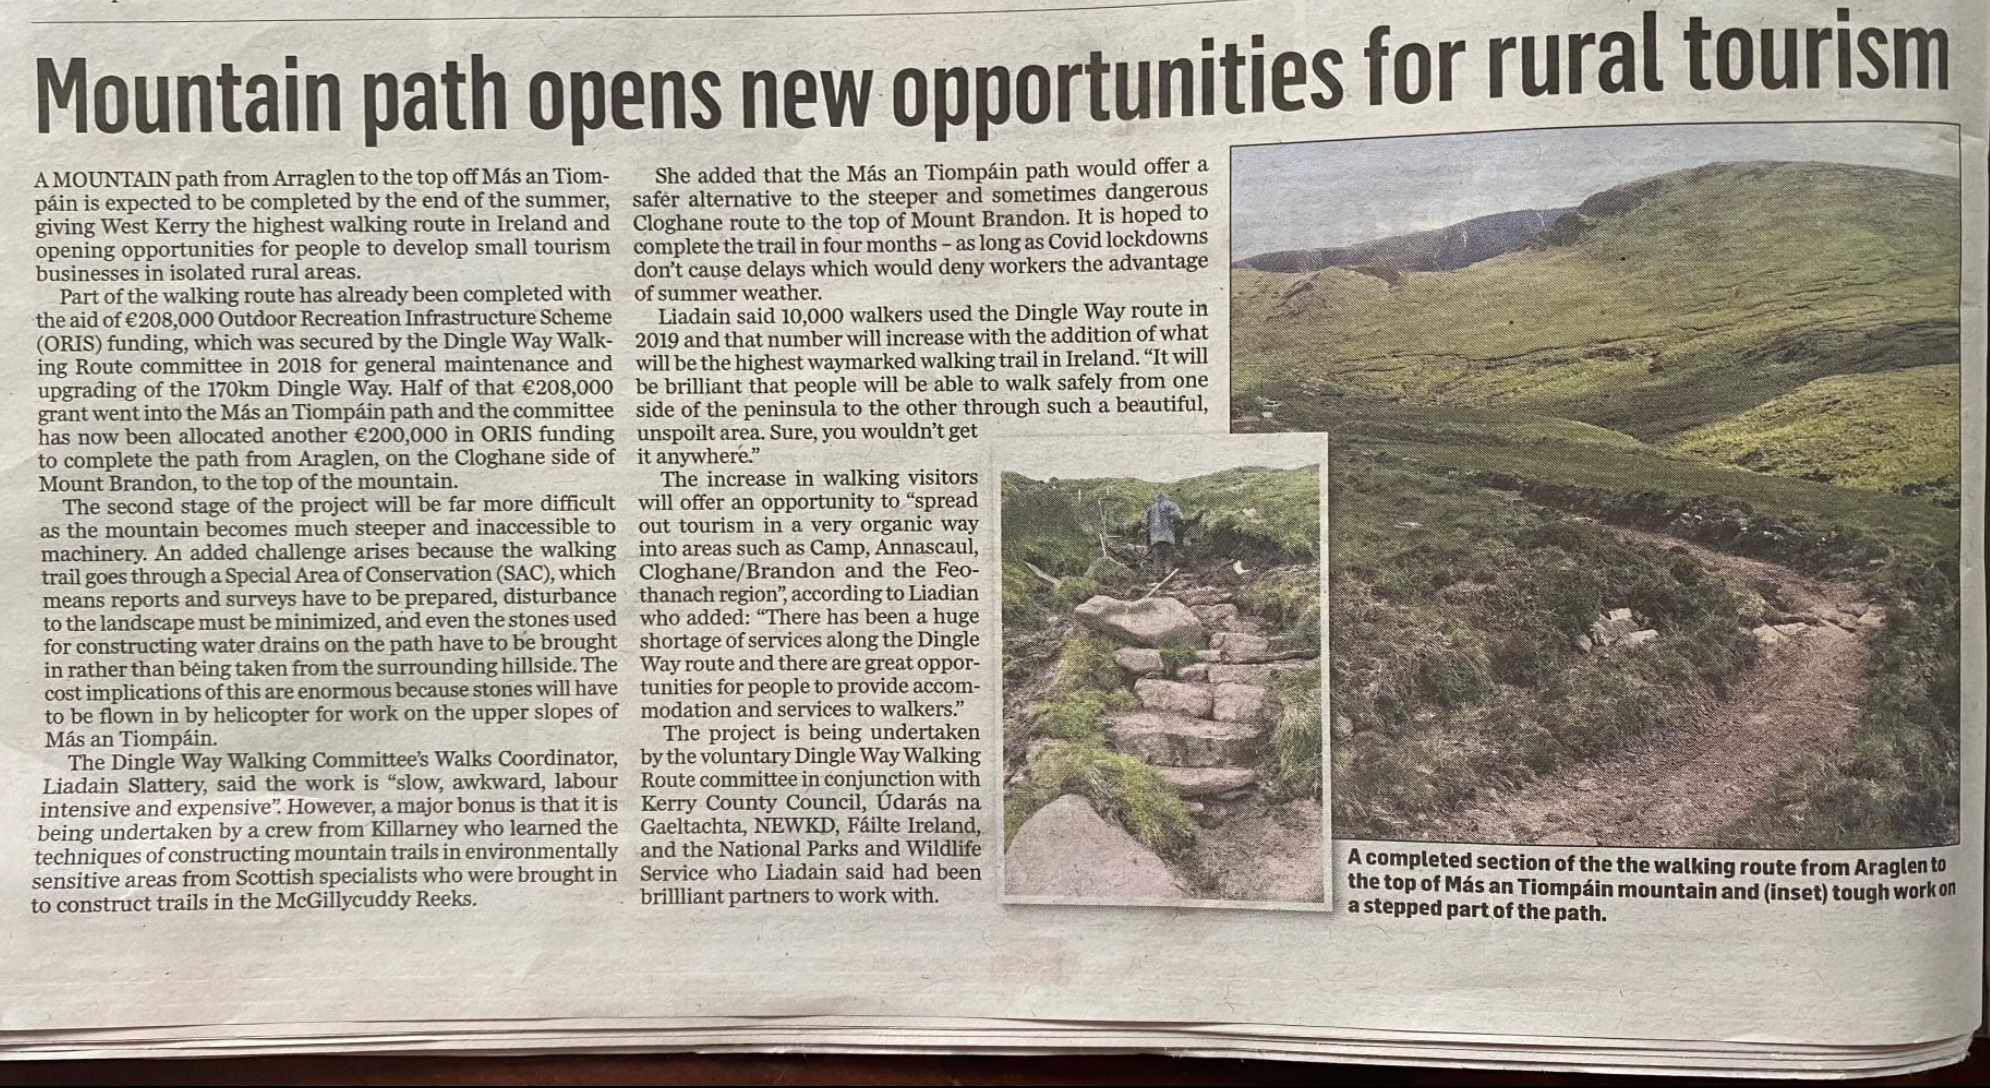 A Kerryman article about a new mountain path opening in West Kerry